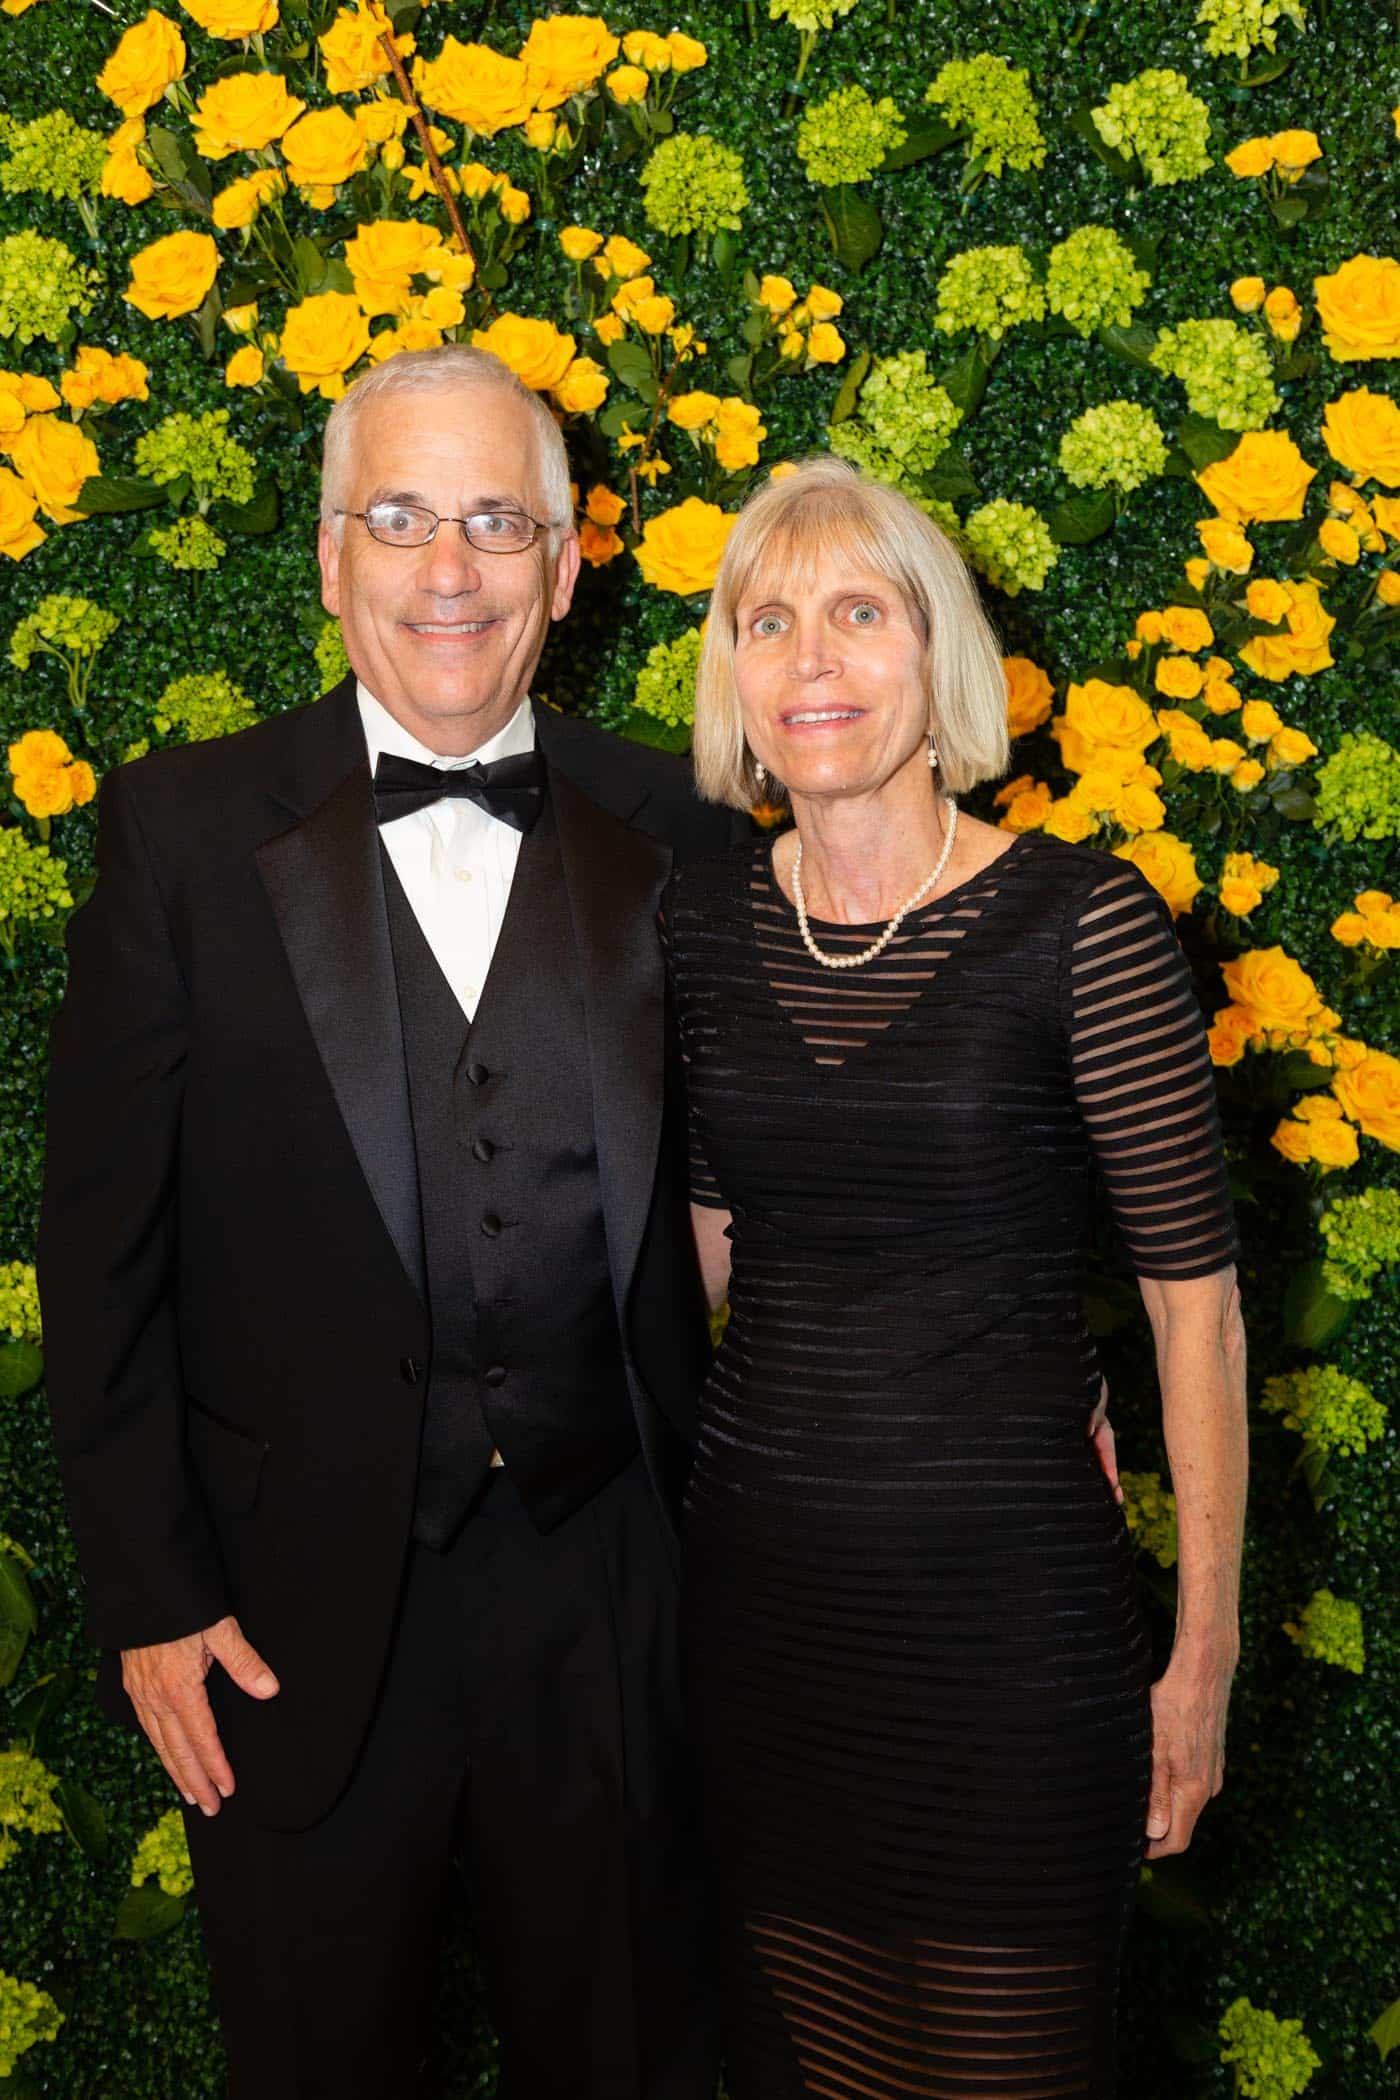 Steve and Lorie Levin